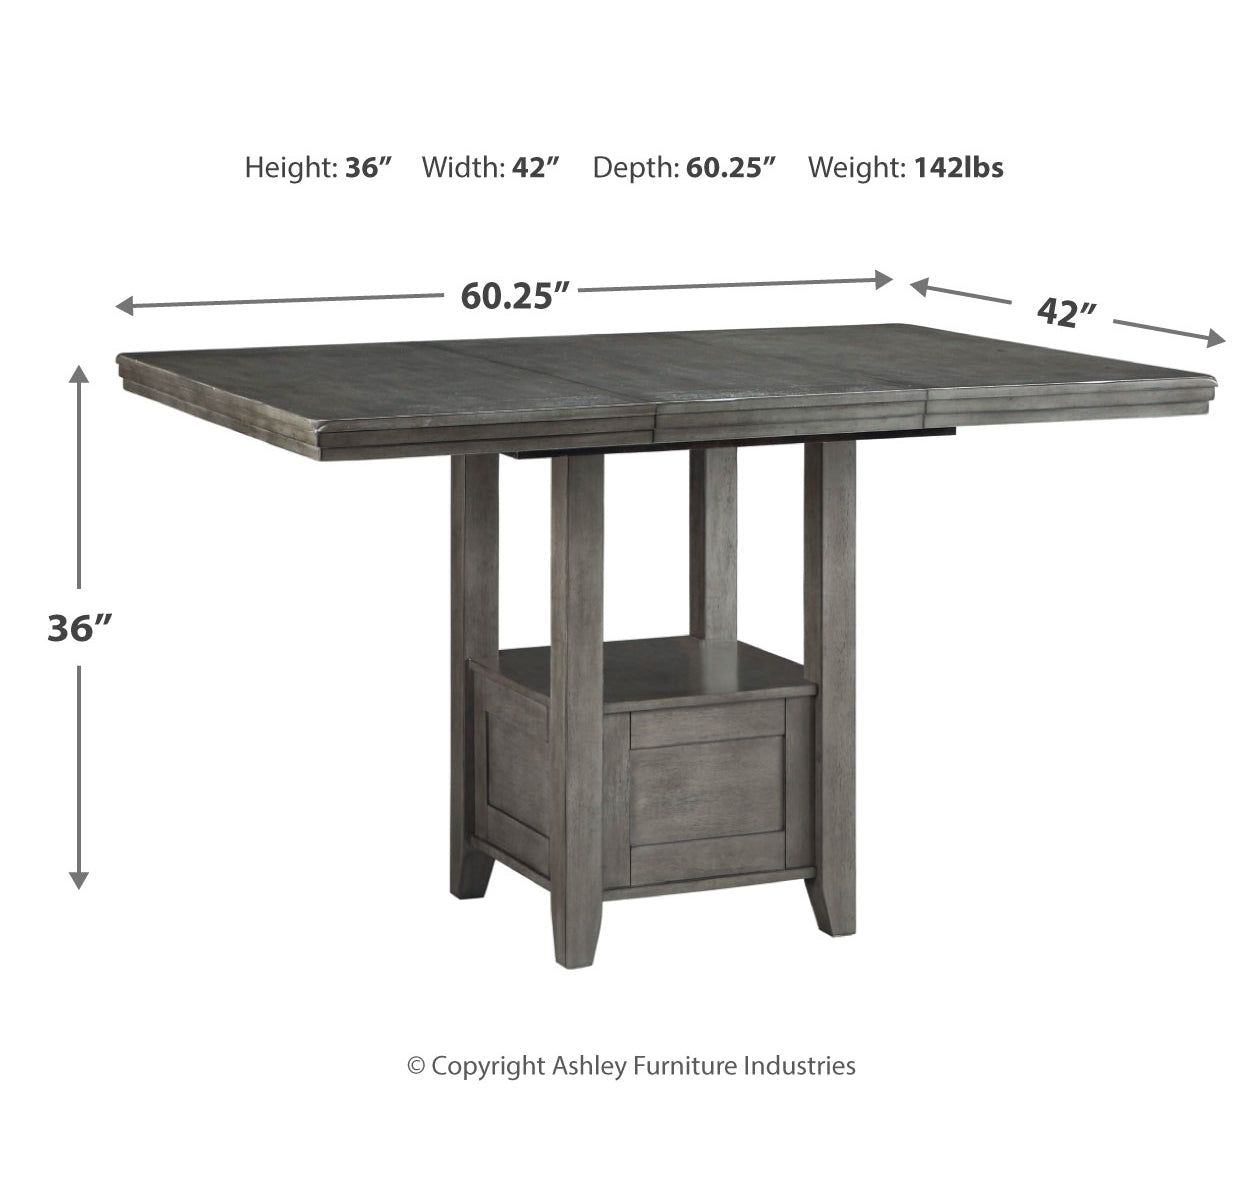 Hallanden Counter Height Dining Table and 6 Barstools with Storage